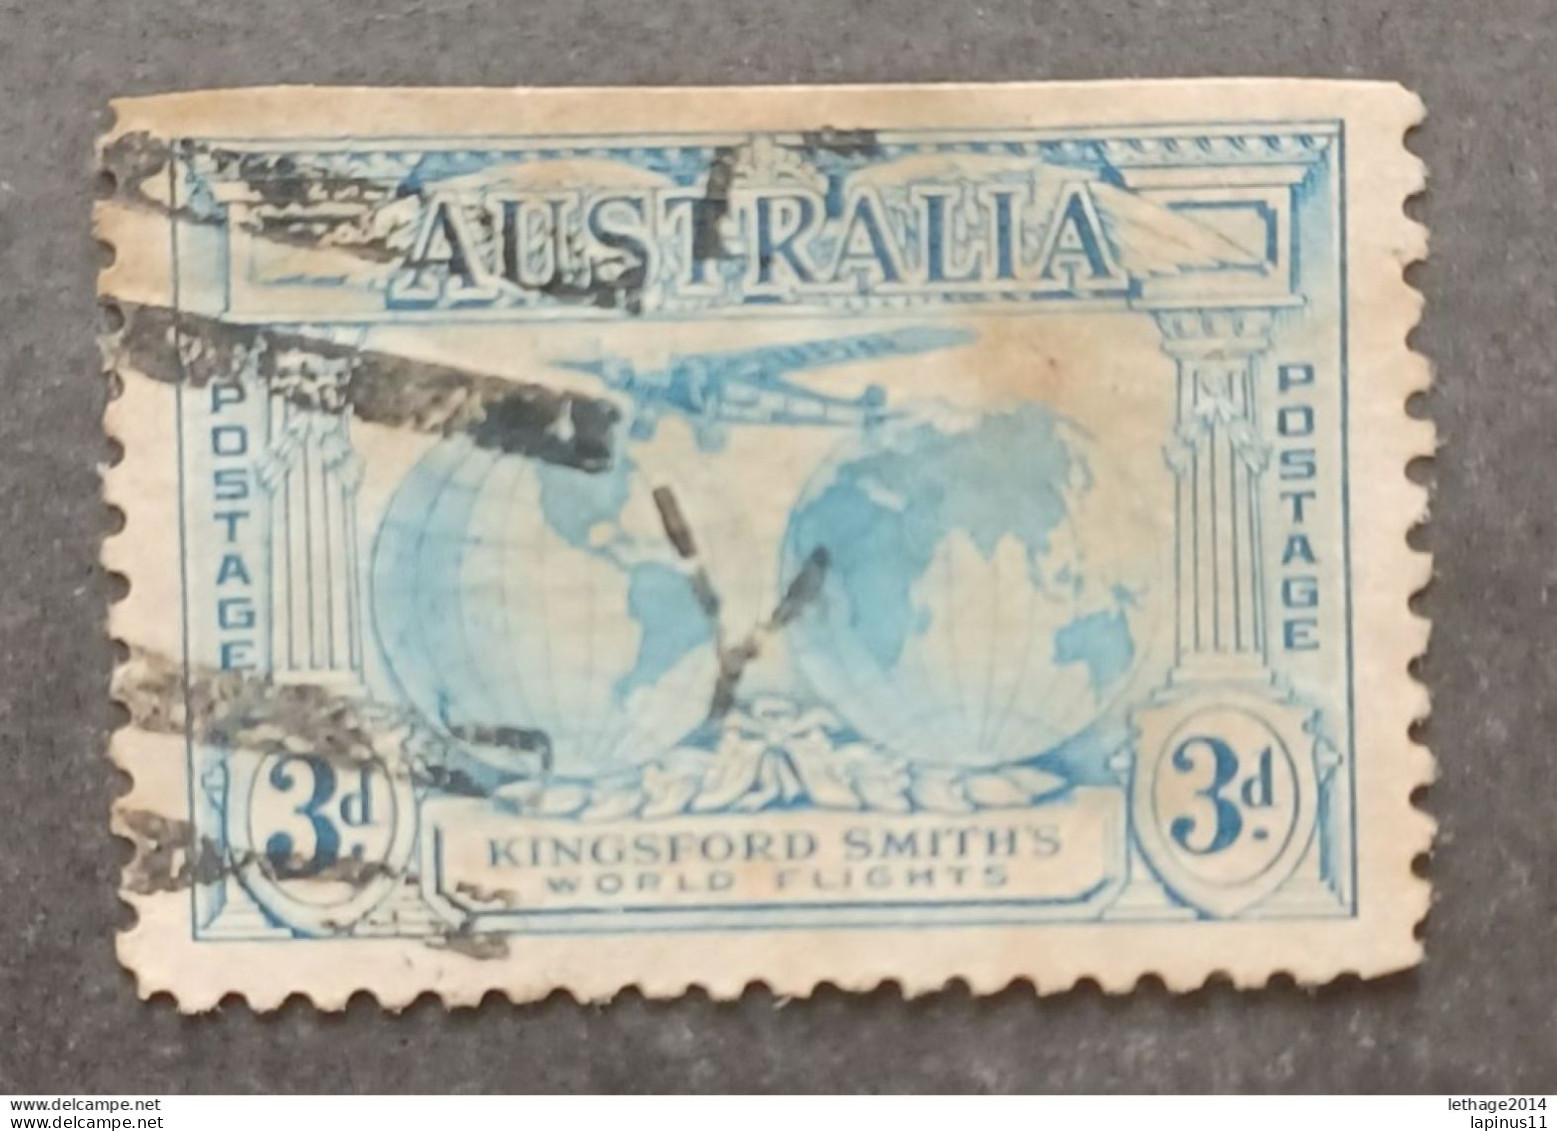 AUSTRALIA 1931 SOUTHERN CROSS OVER OF THE EMISPHERES SCOTT N 112 VARIETY SUPERIOR IMPERFORATE - Used Stamps